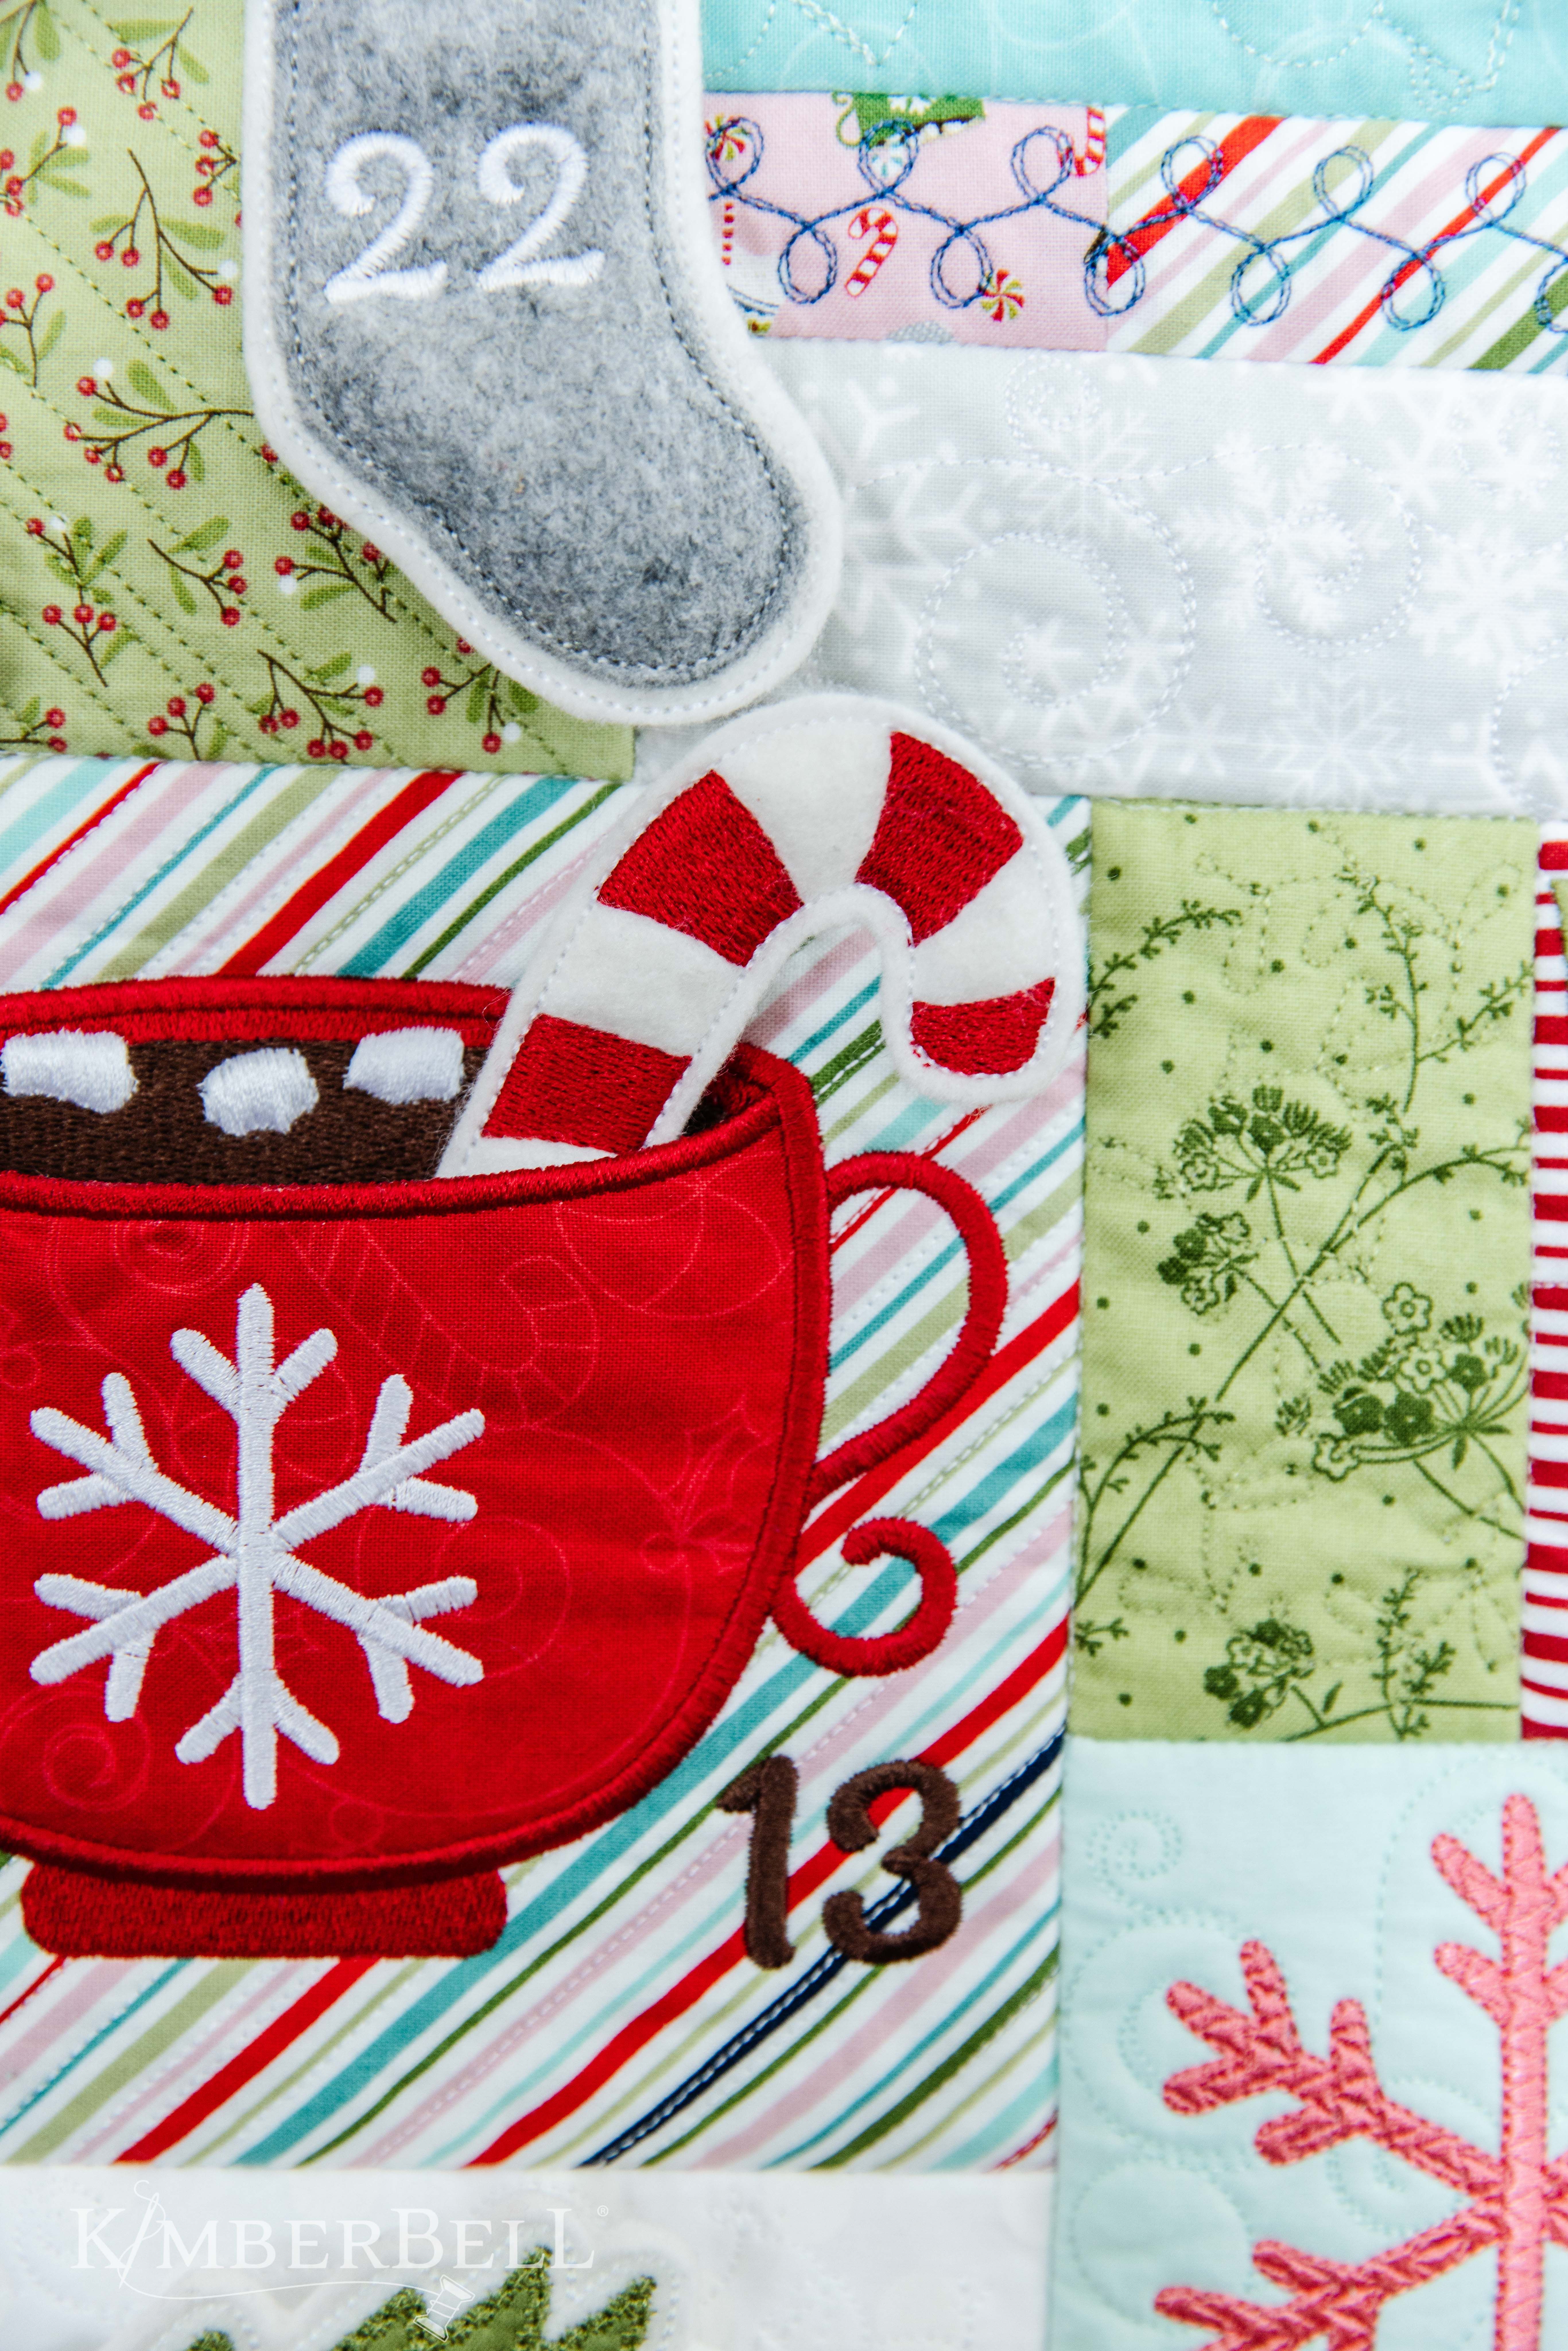 Kimberbell Designs - Wondering what stabilizer you'll need to make your Cup  of Cheer Advent Quilt? Look no further! 🥰 Create your whimsical quilt with  the following Kimberbell products: 1. Embroidery Topping (